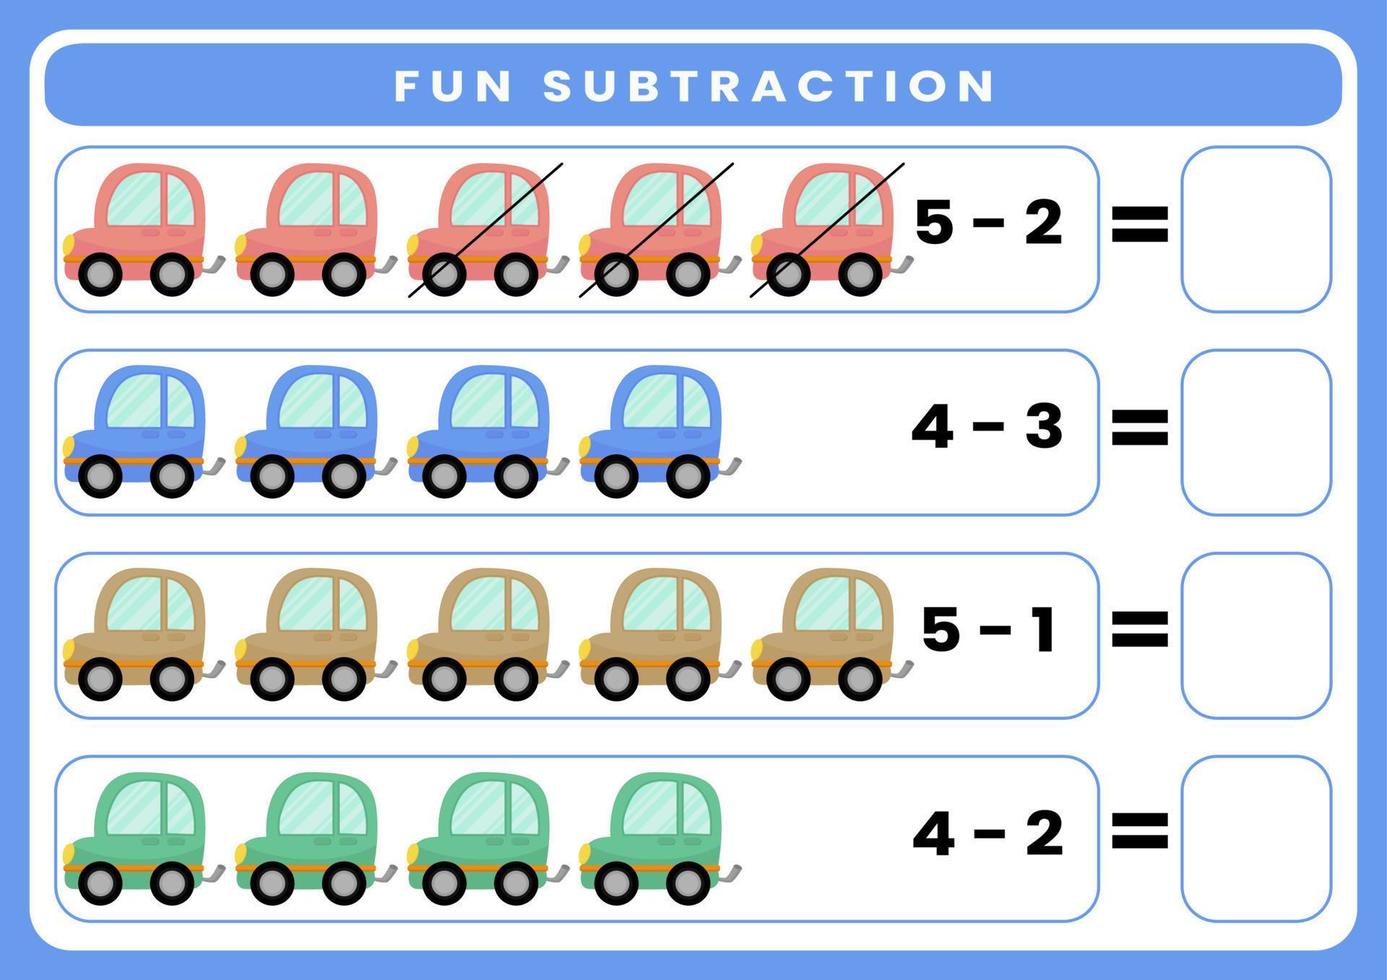 Education game for children fun subtraction by counting cute cartoon transportation. Printable worksheet vector